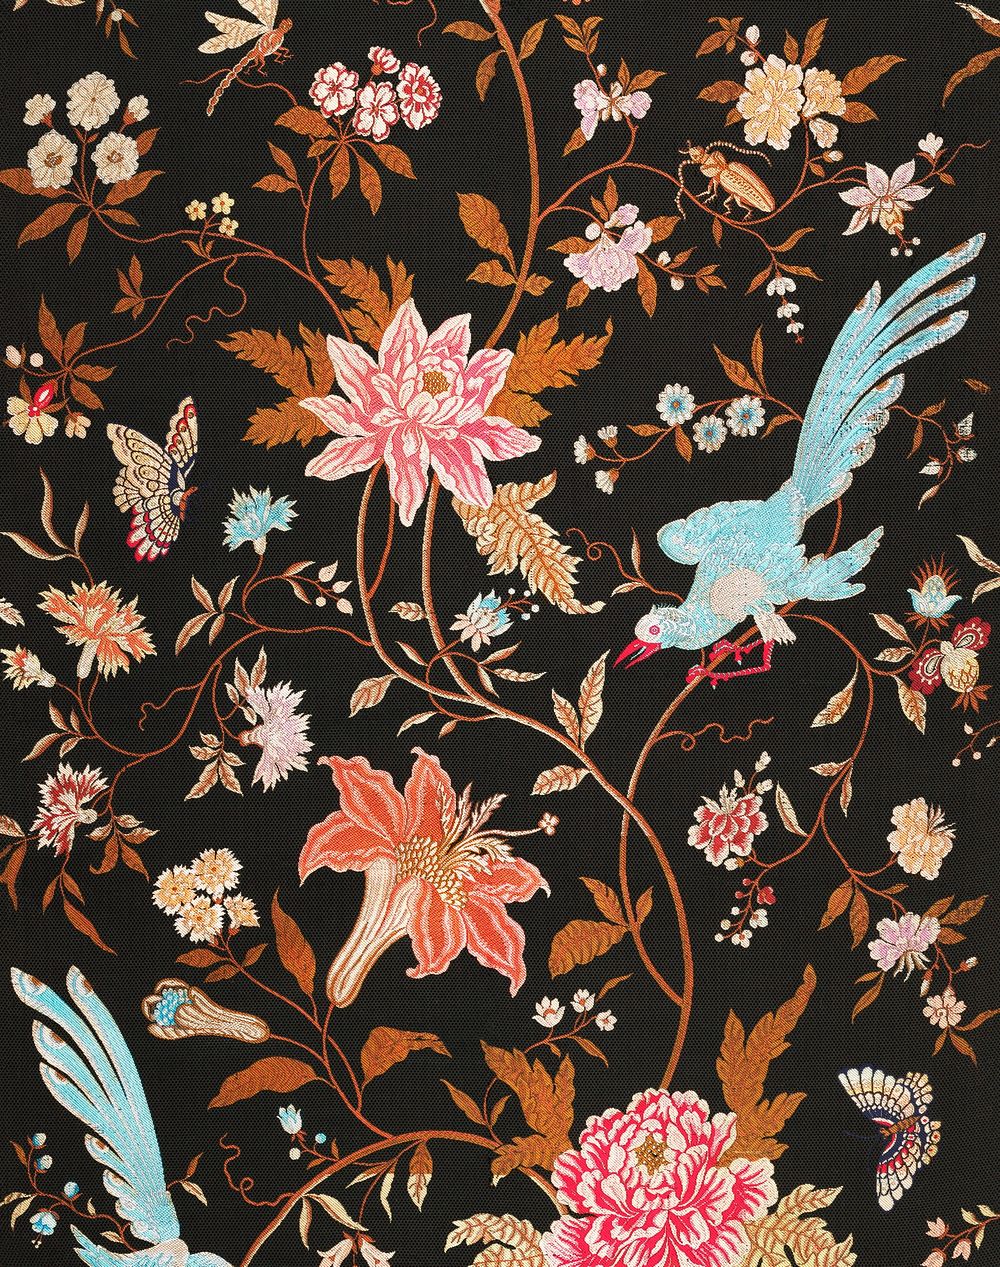 Floral woven textiles in high resolution from the late 19th century. Original from The Smithsonian. Digitally enhanced by…